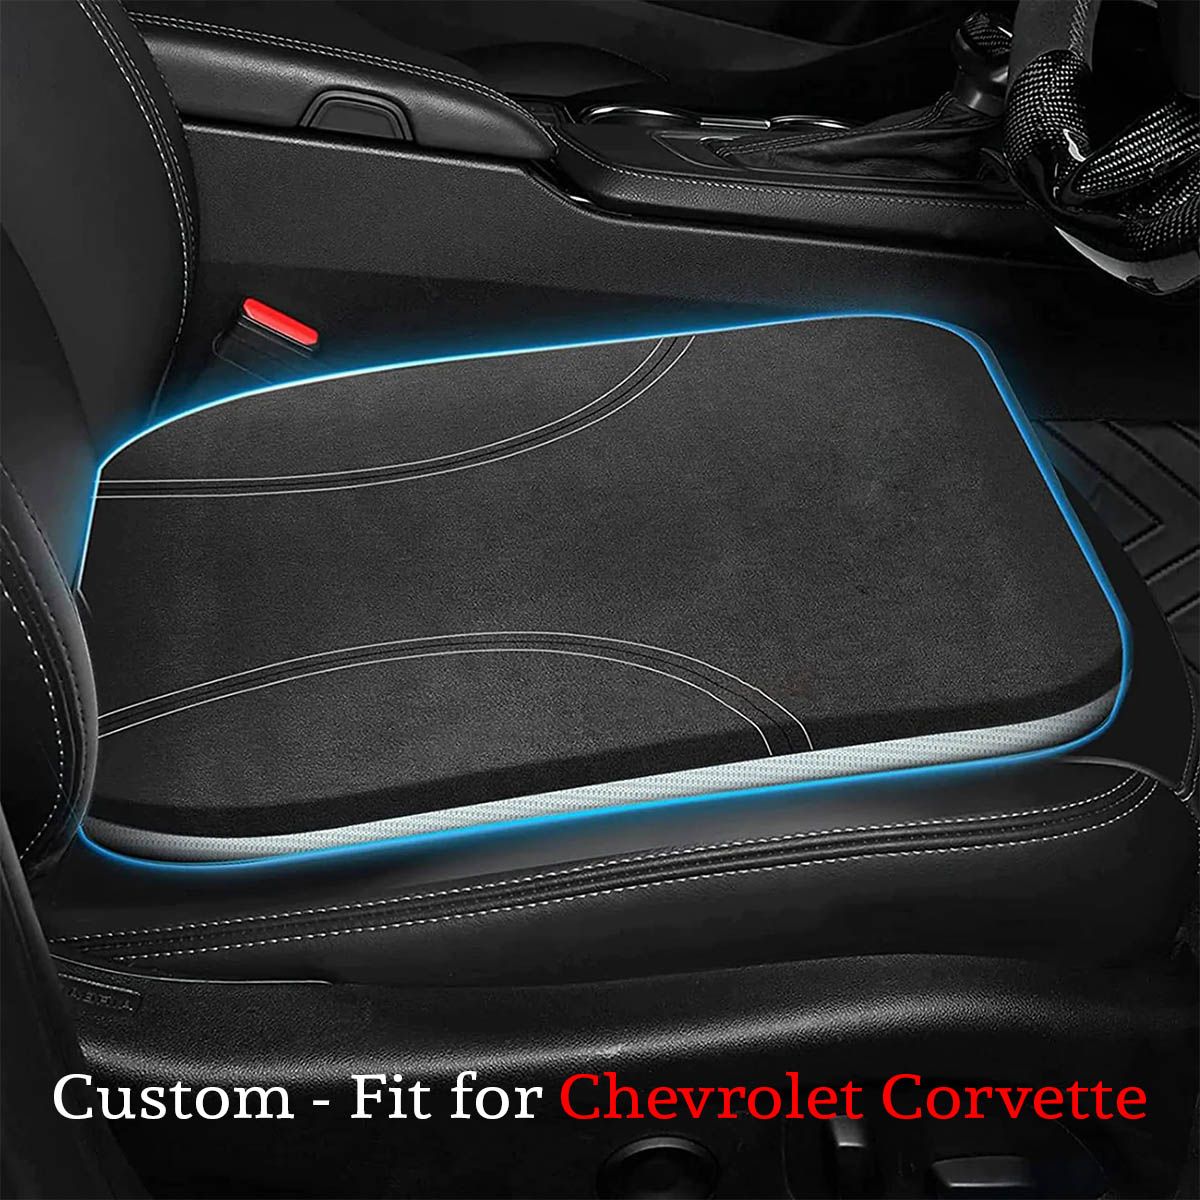 Delicate Leather Car Seat Cushion, Custom For Cars, Car Memory Foam Seat Cushion, Heightening Seat Cushion, Seat Cushion for Car and Office Chair CC19999